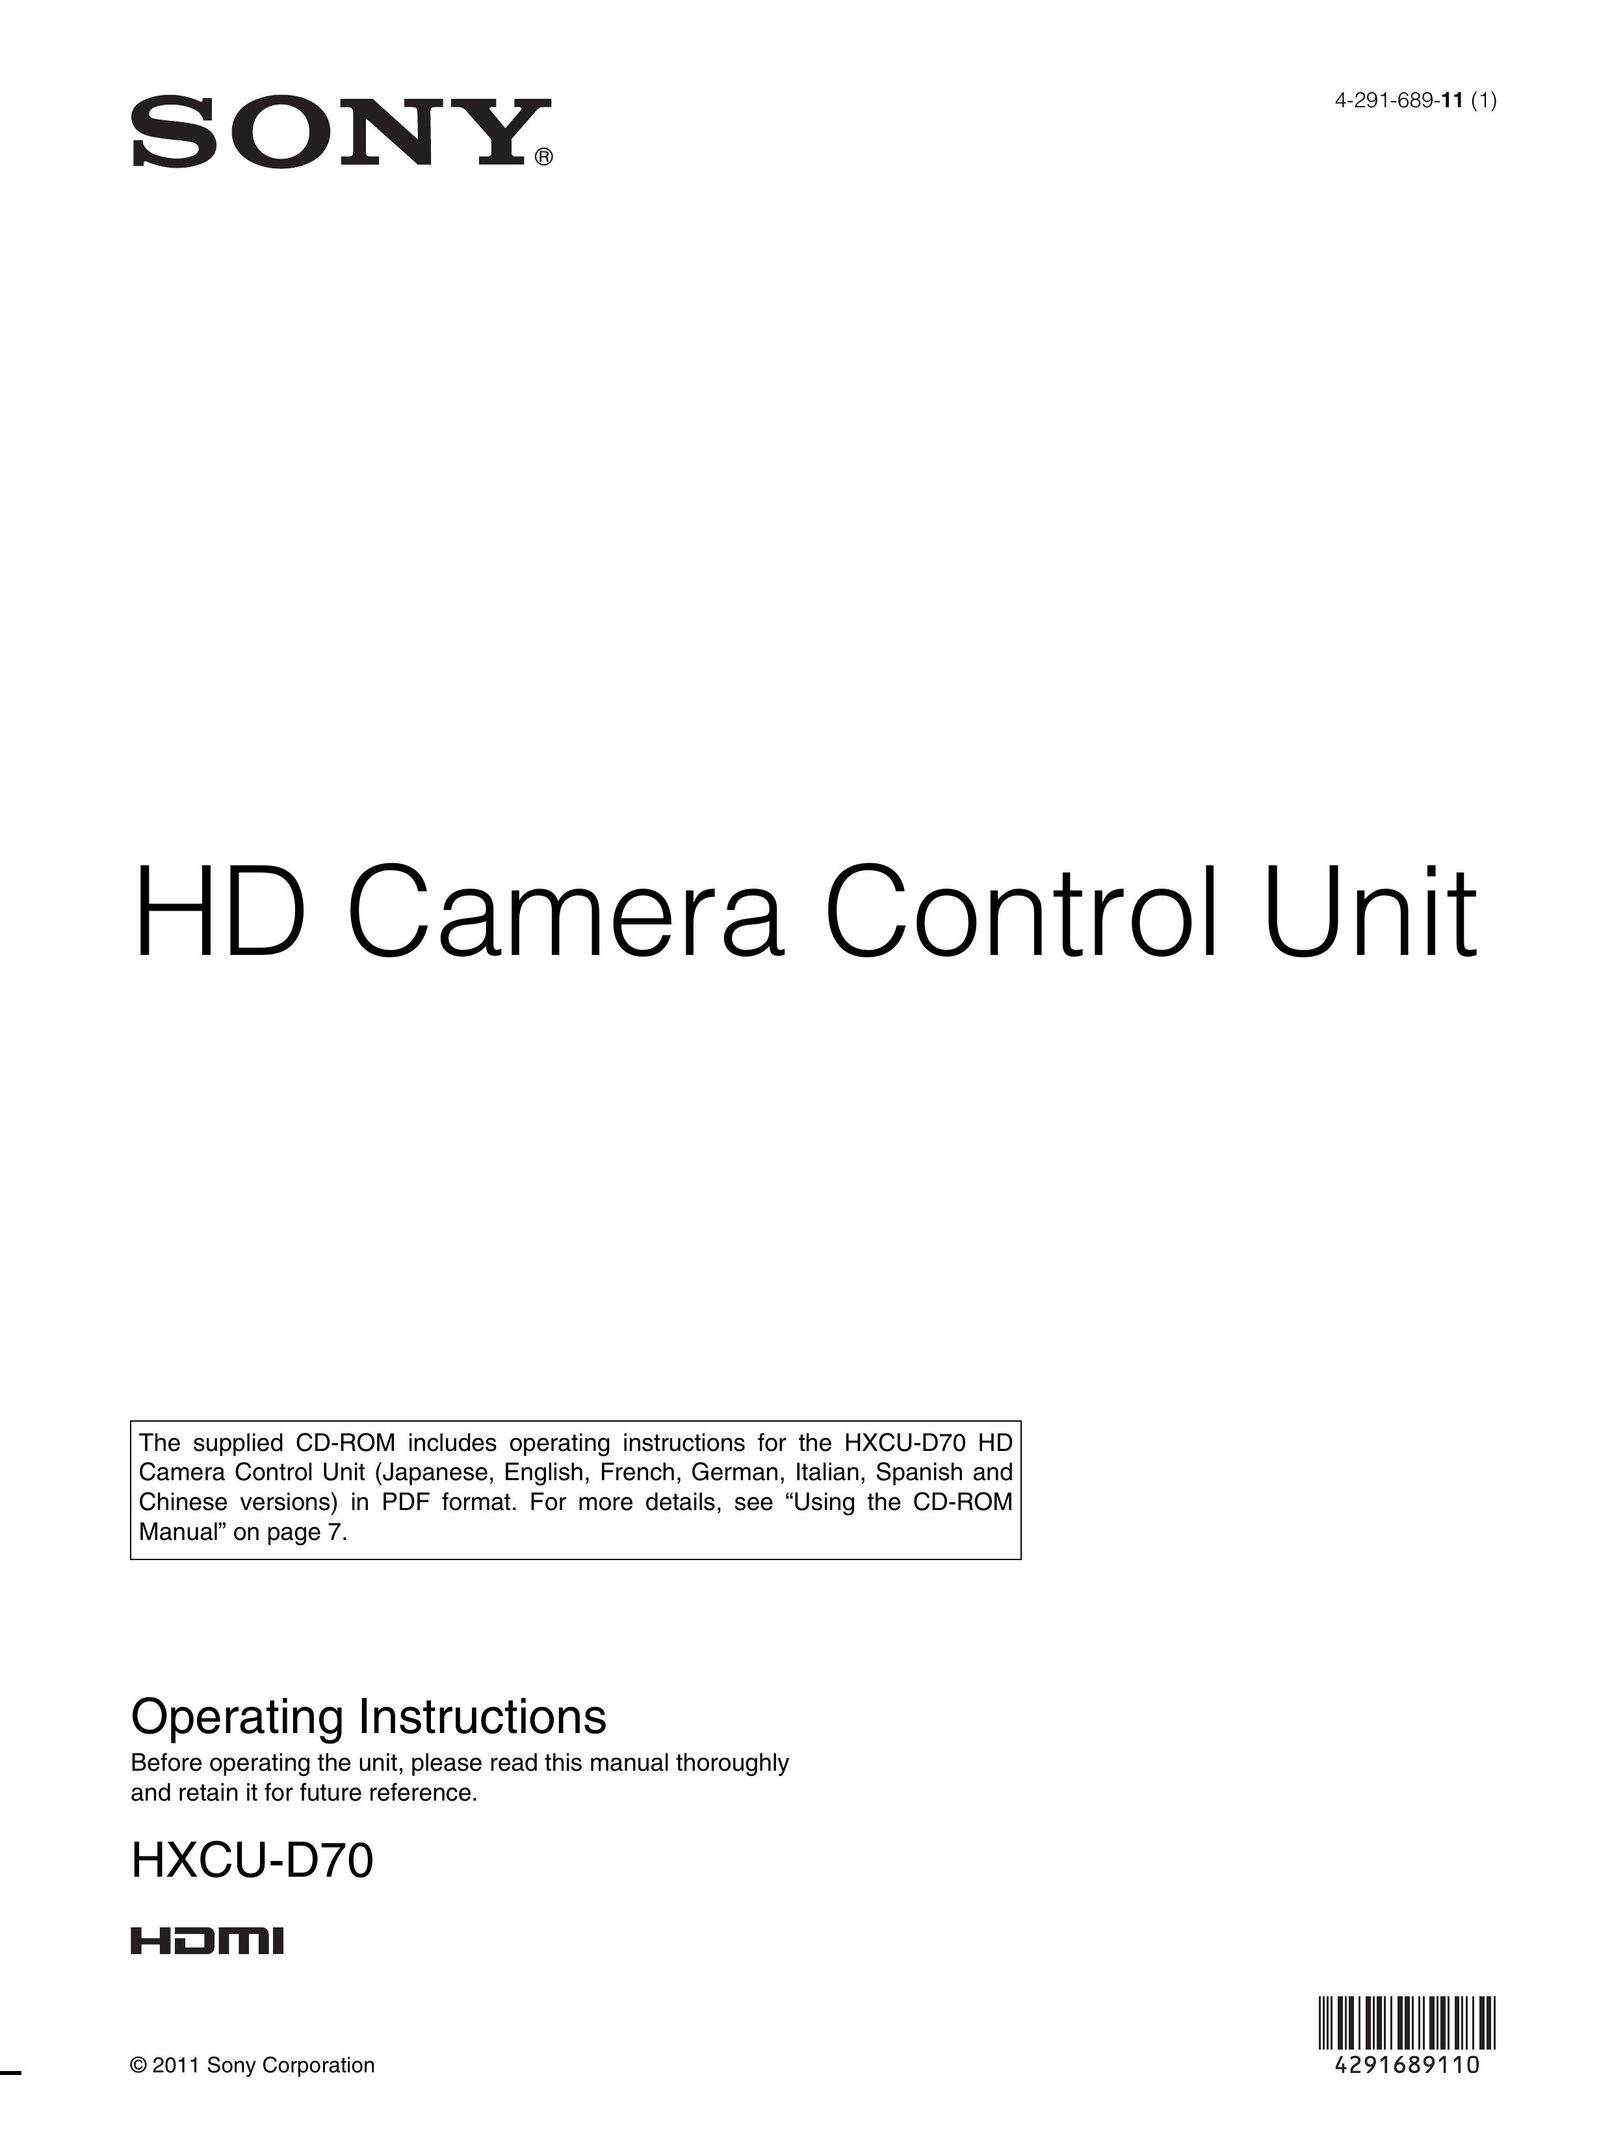 Sony HXCU-D70 TV Cables User Manual